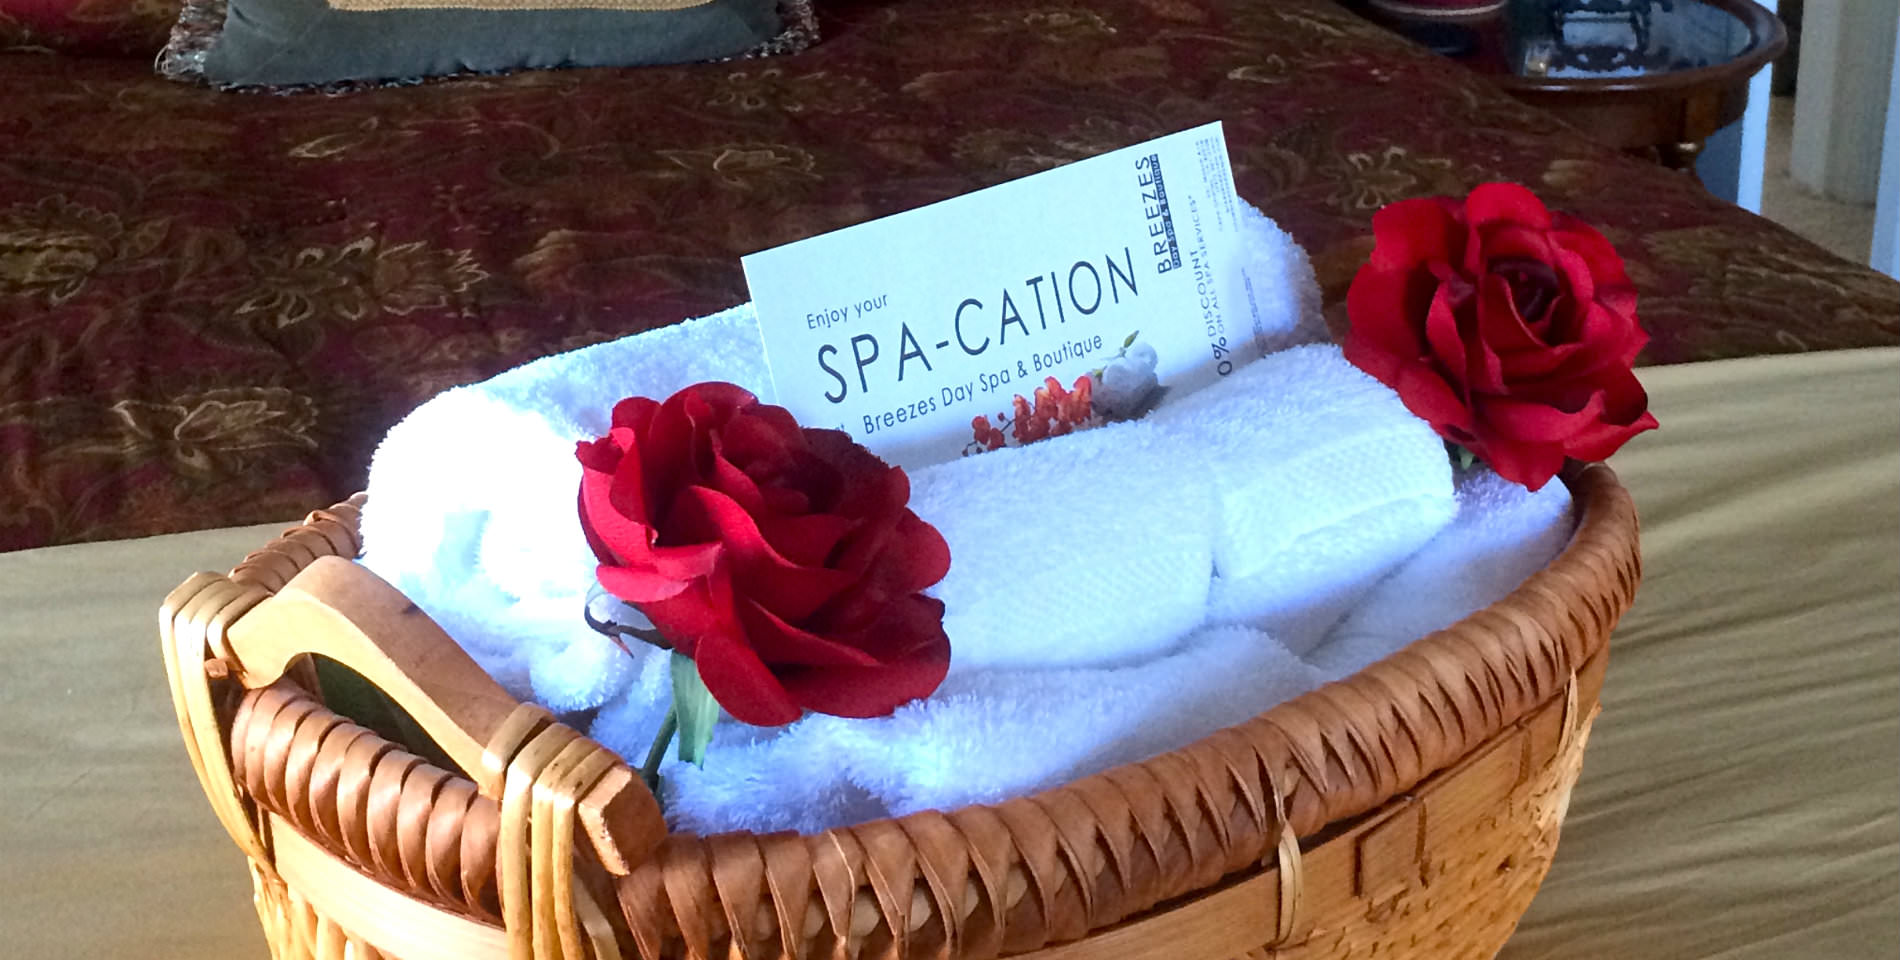 A bundle of plush white towels in a wicker basket with two red roses and a card with text: Enjoy your SPA-CATION.